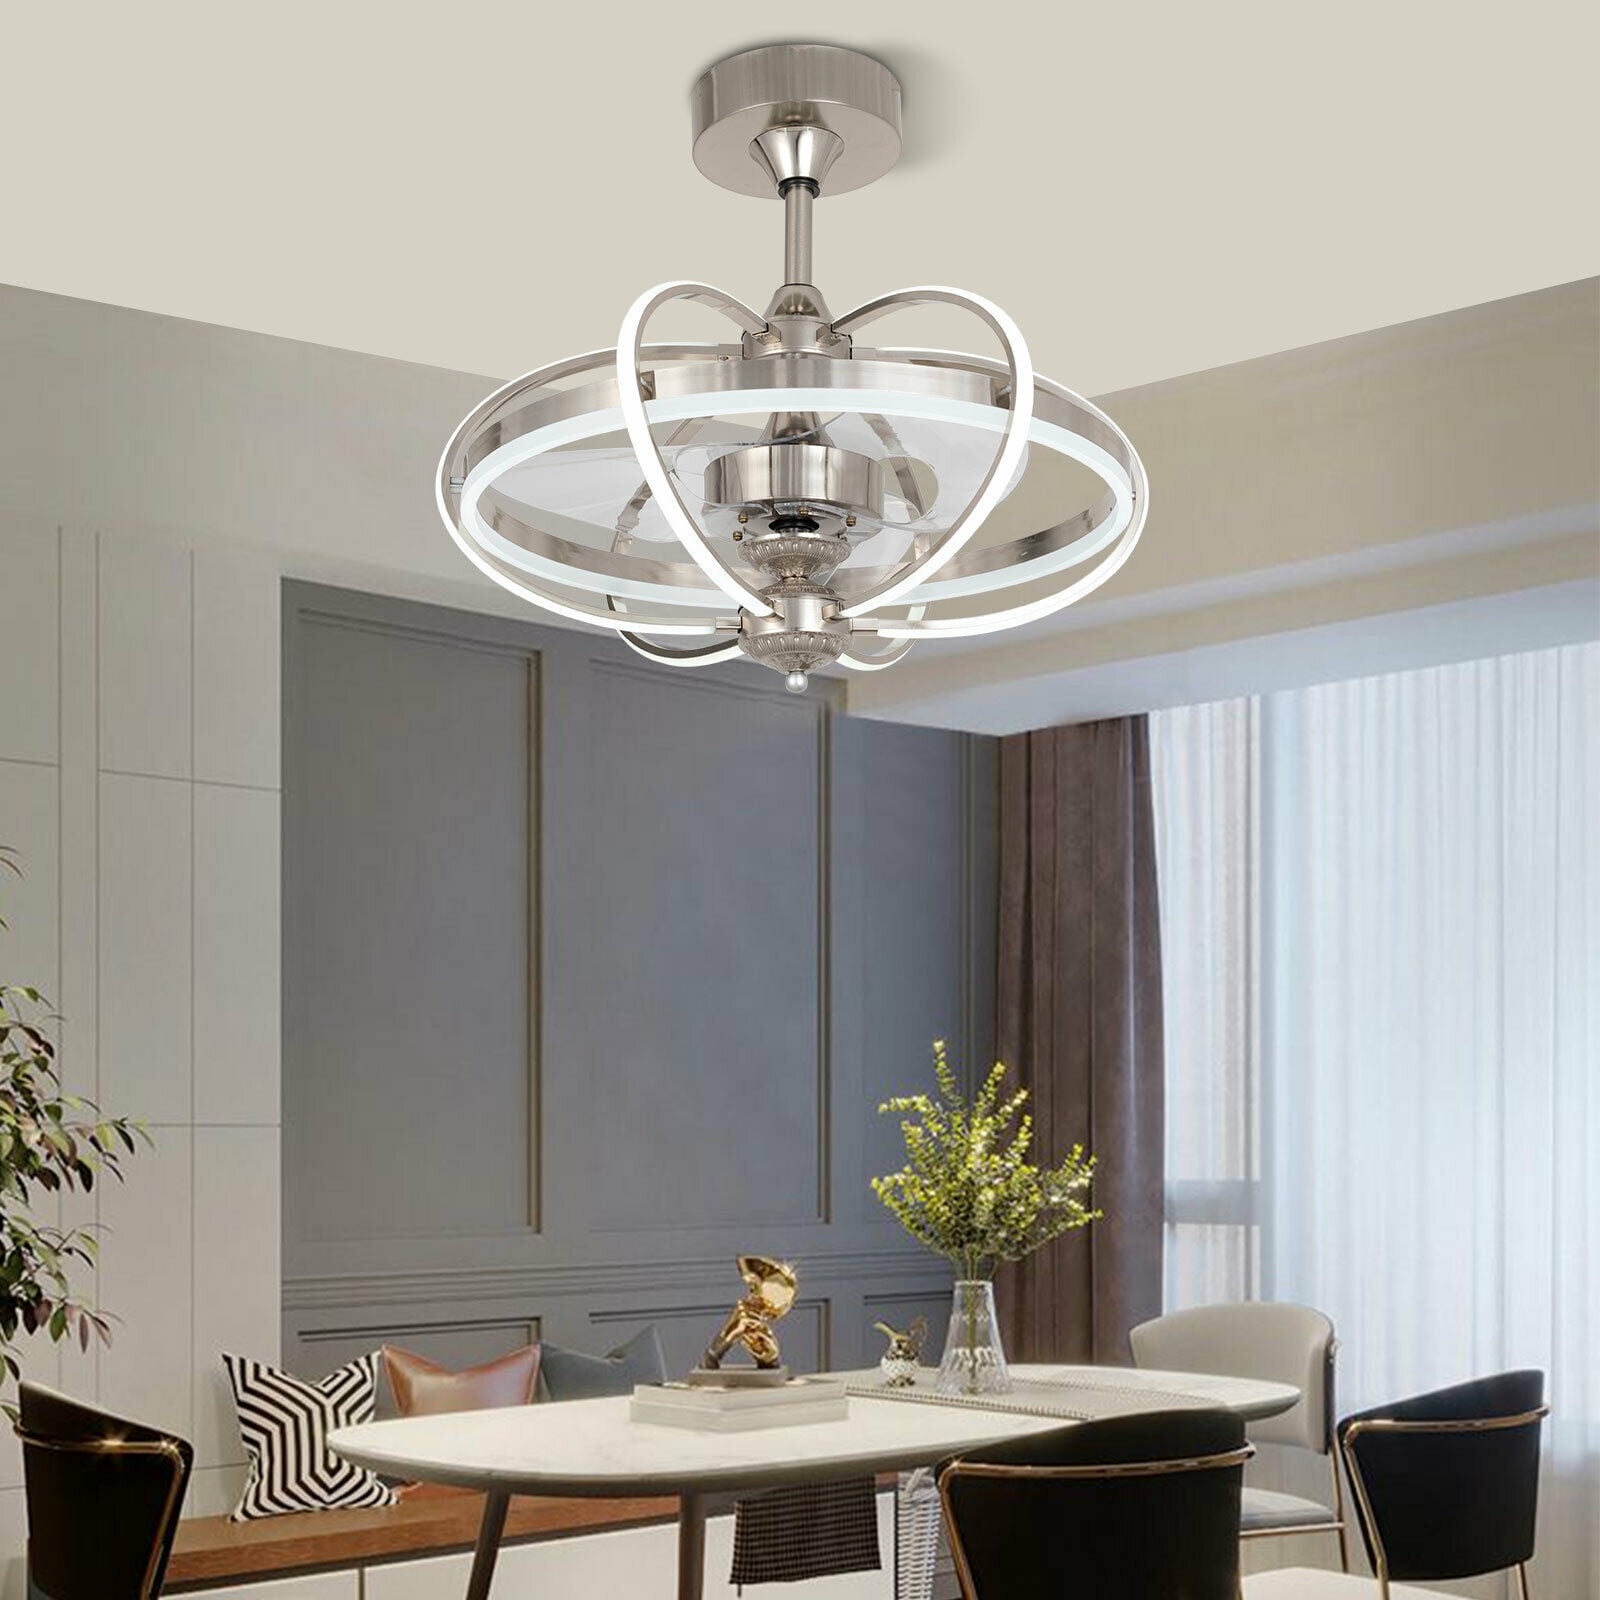 40 20CM Household lighting stylish and beautiful Chandelier 3-design table lamp metal chandelier hanging chandeliers and lamps acrylic LED 60W lamps modern living room lighting ceiling island -60 